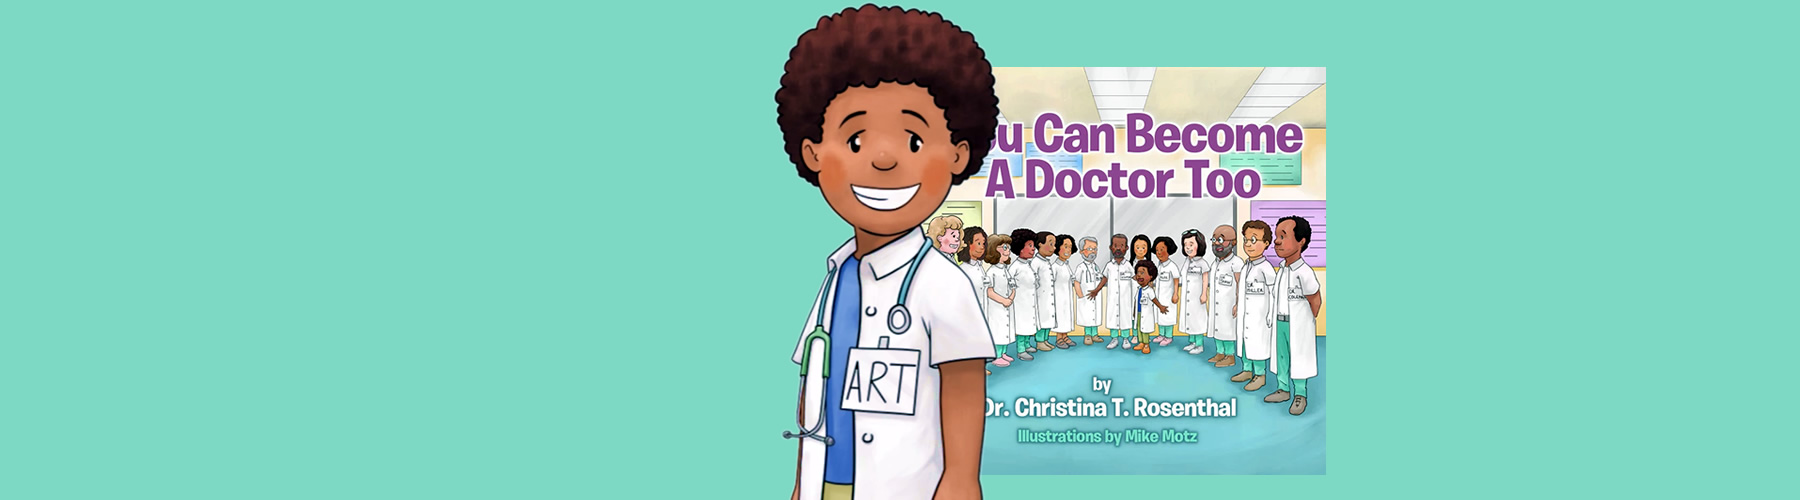 You Can Become a Doctor Too